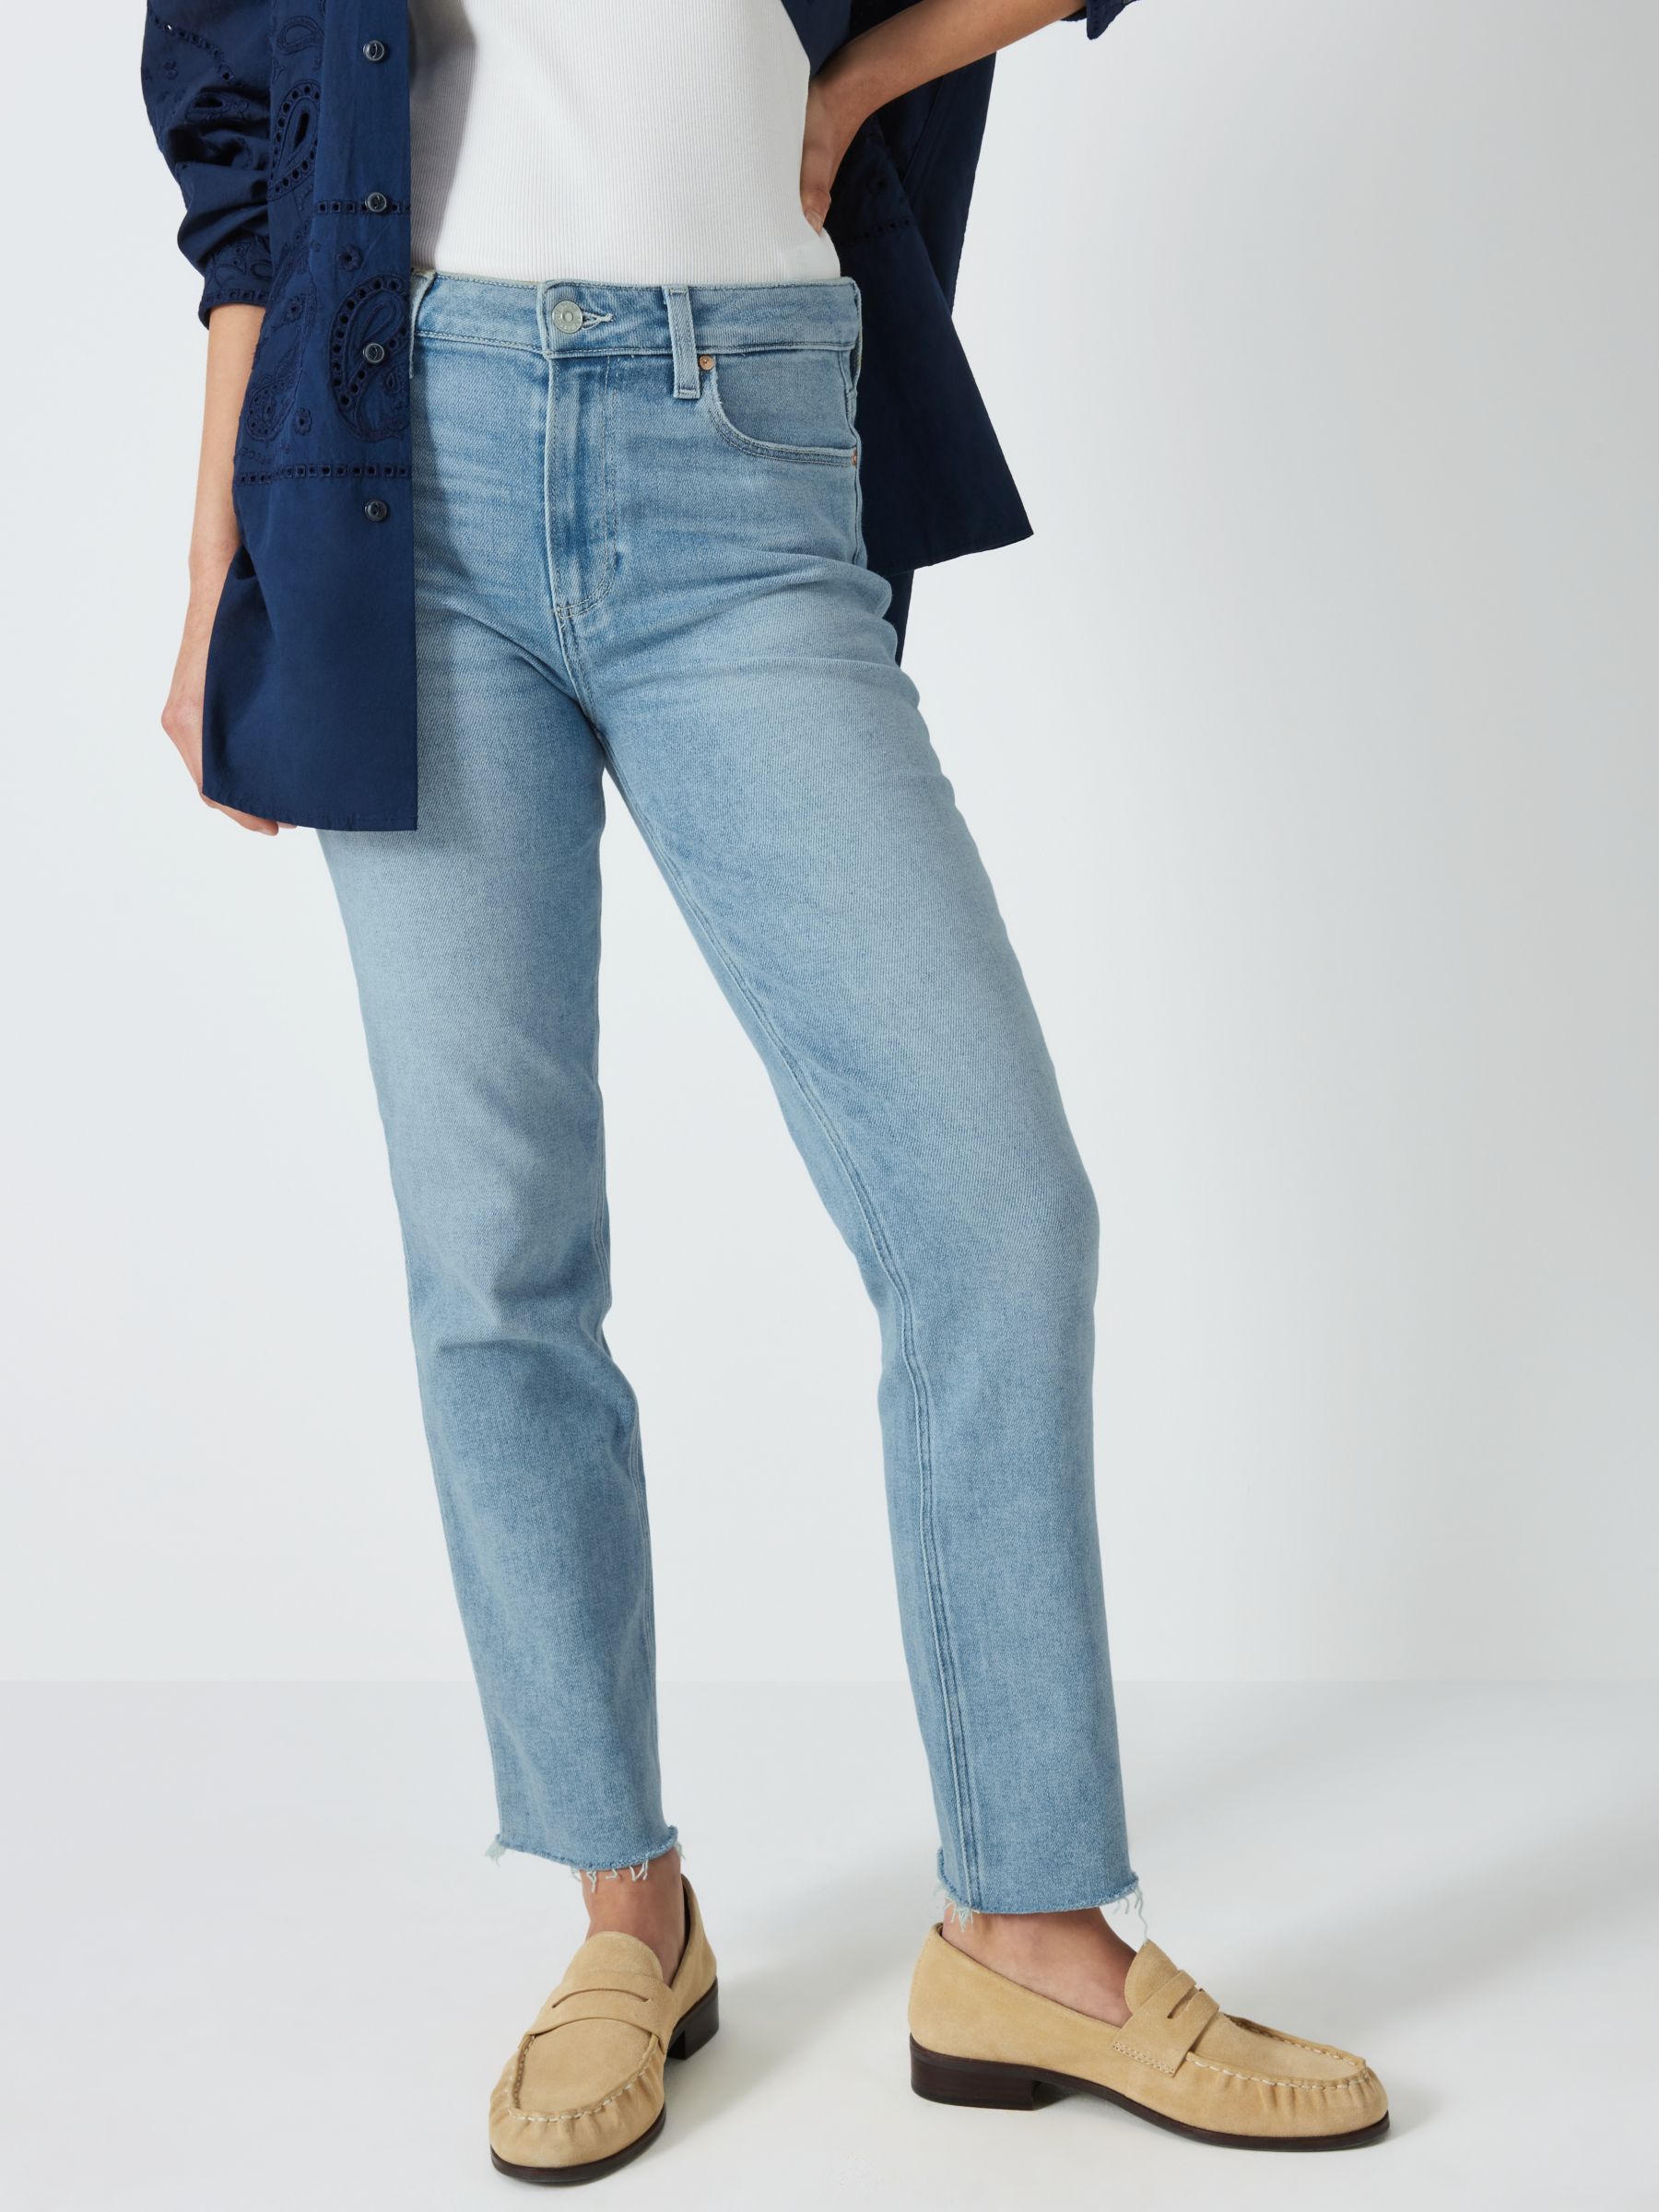 Paige Cindy Straight Leg Jeans Col: Sketchbook, Size: 30